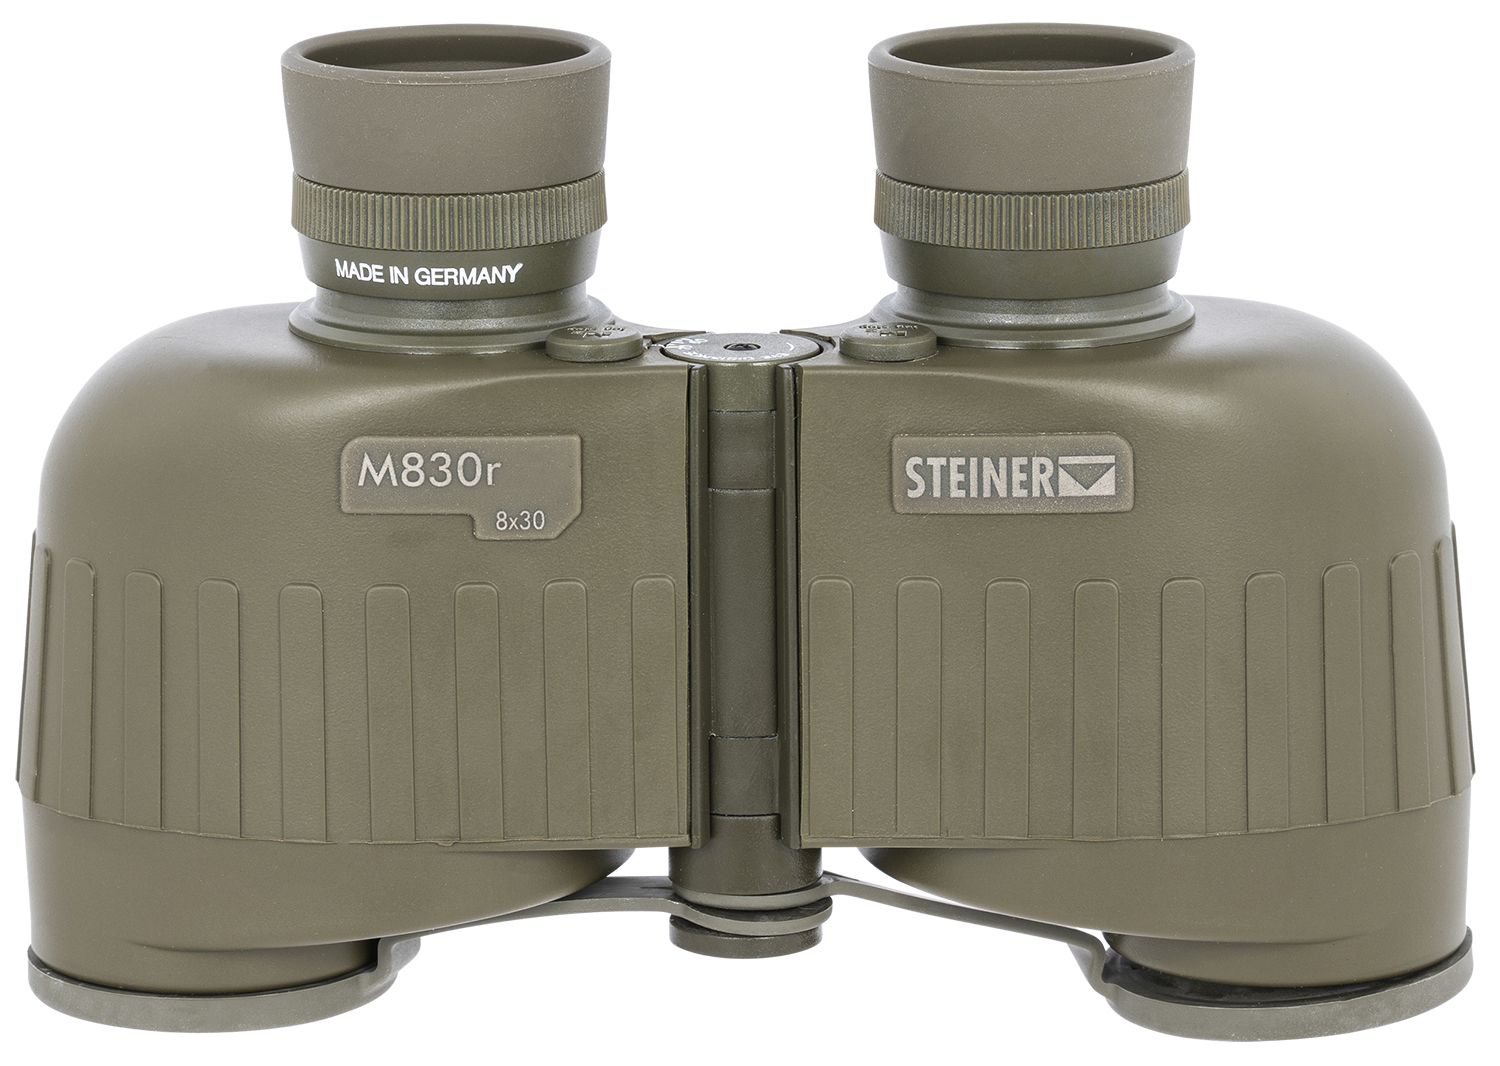 Steiner 2640 M830r  8x30mm Mil Radian Ranging Reticle Floating Prism Green Rubber Armor